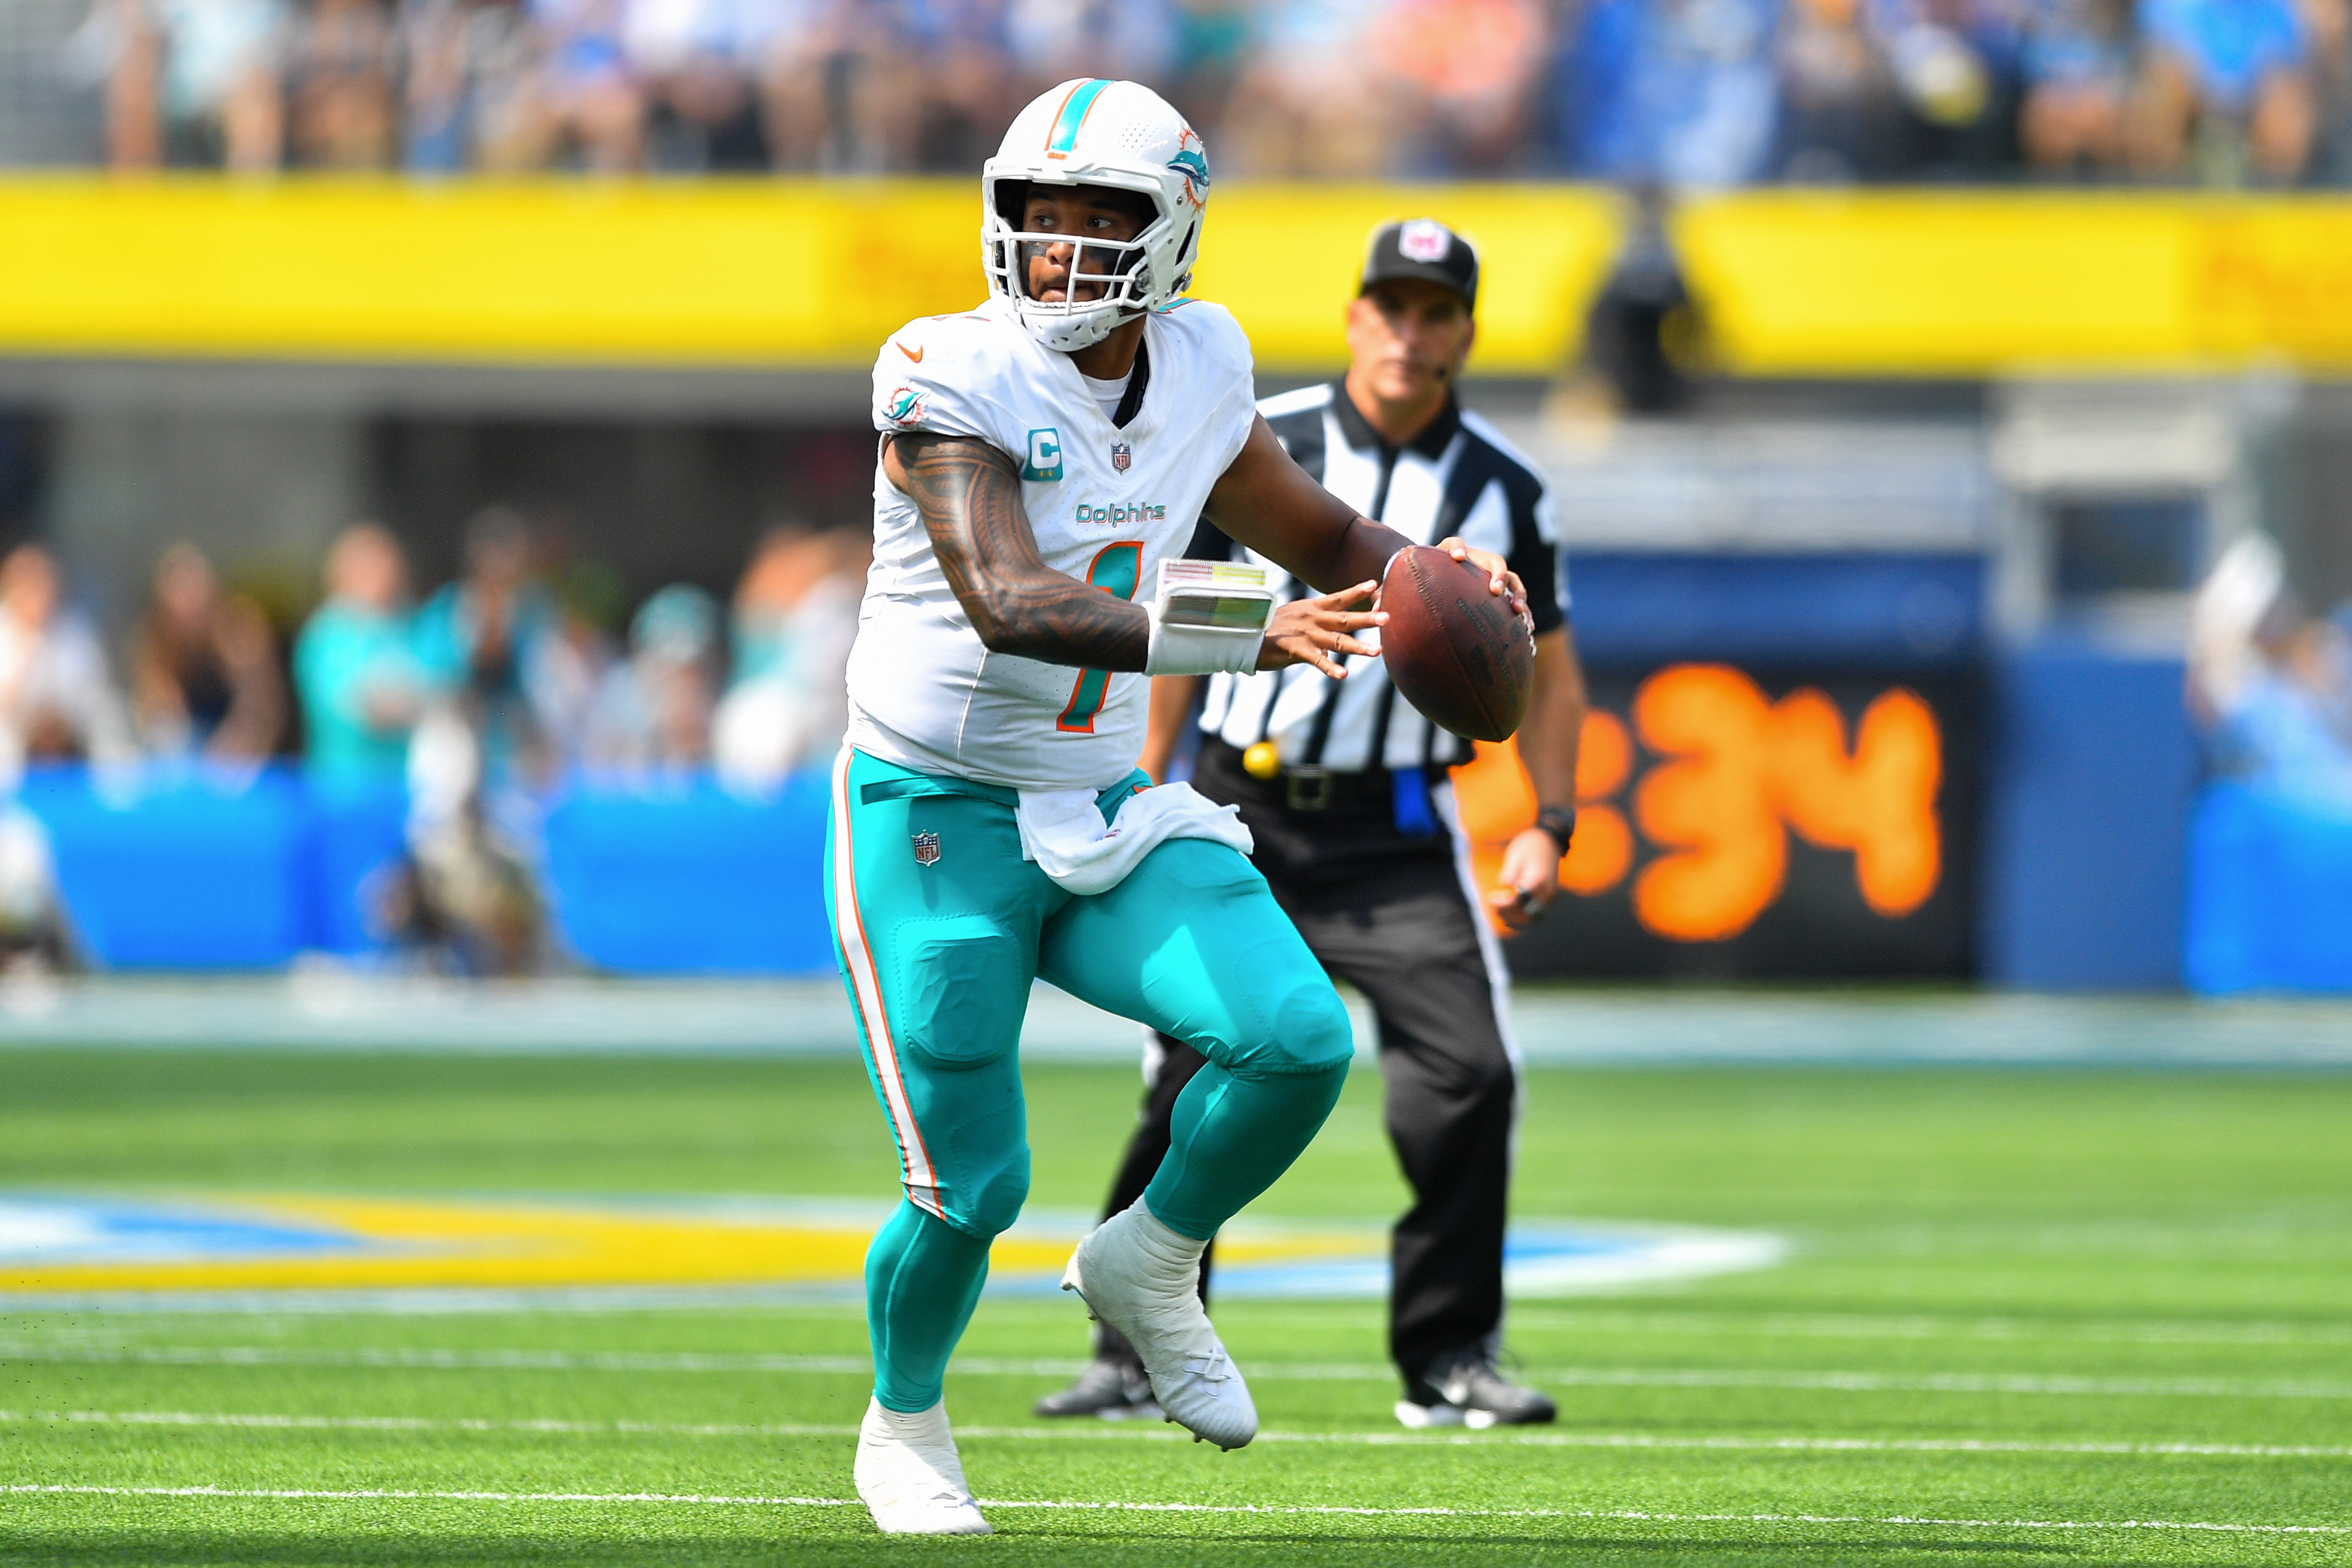 Quarerback Tua Tagovailoa of the Miami Dolphins looks to pass in the game against the Los Angeles Chargers at SoFi Stadium in Inglewood, California, September 10, 2023. /CFP